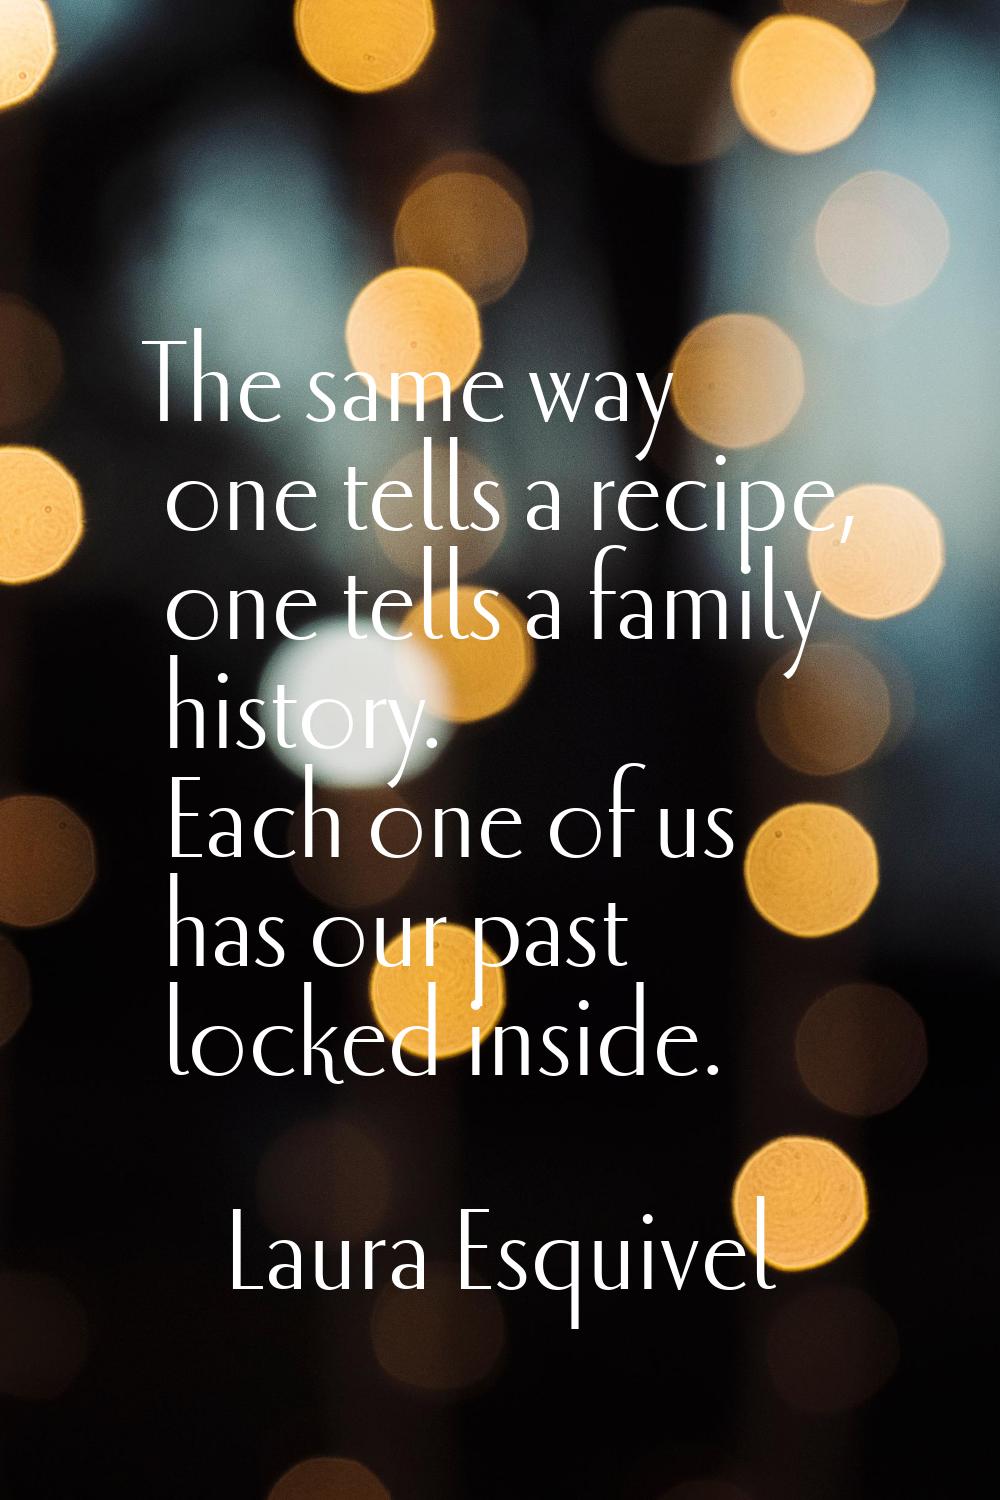 The same way one tells a recipe, one tells a family history. Each one of us has our past locked ins